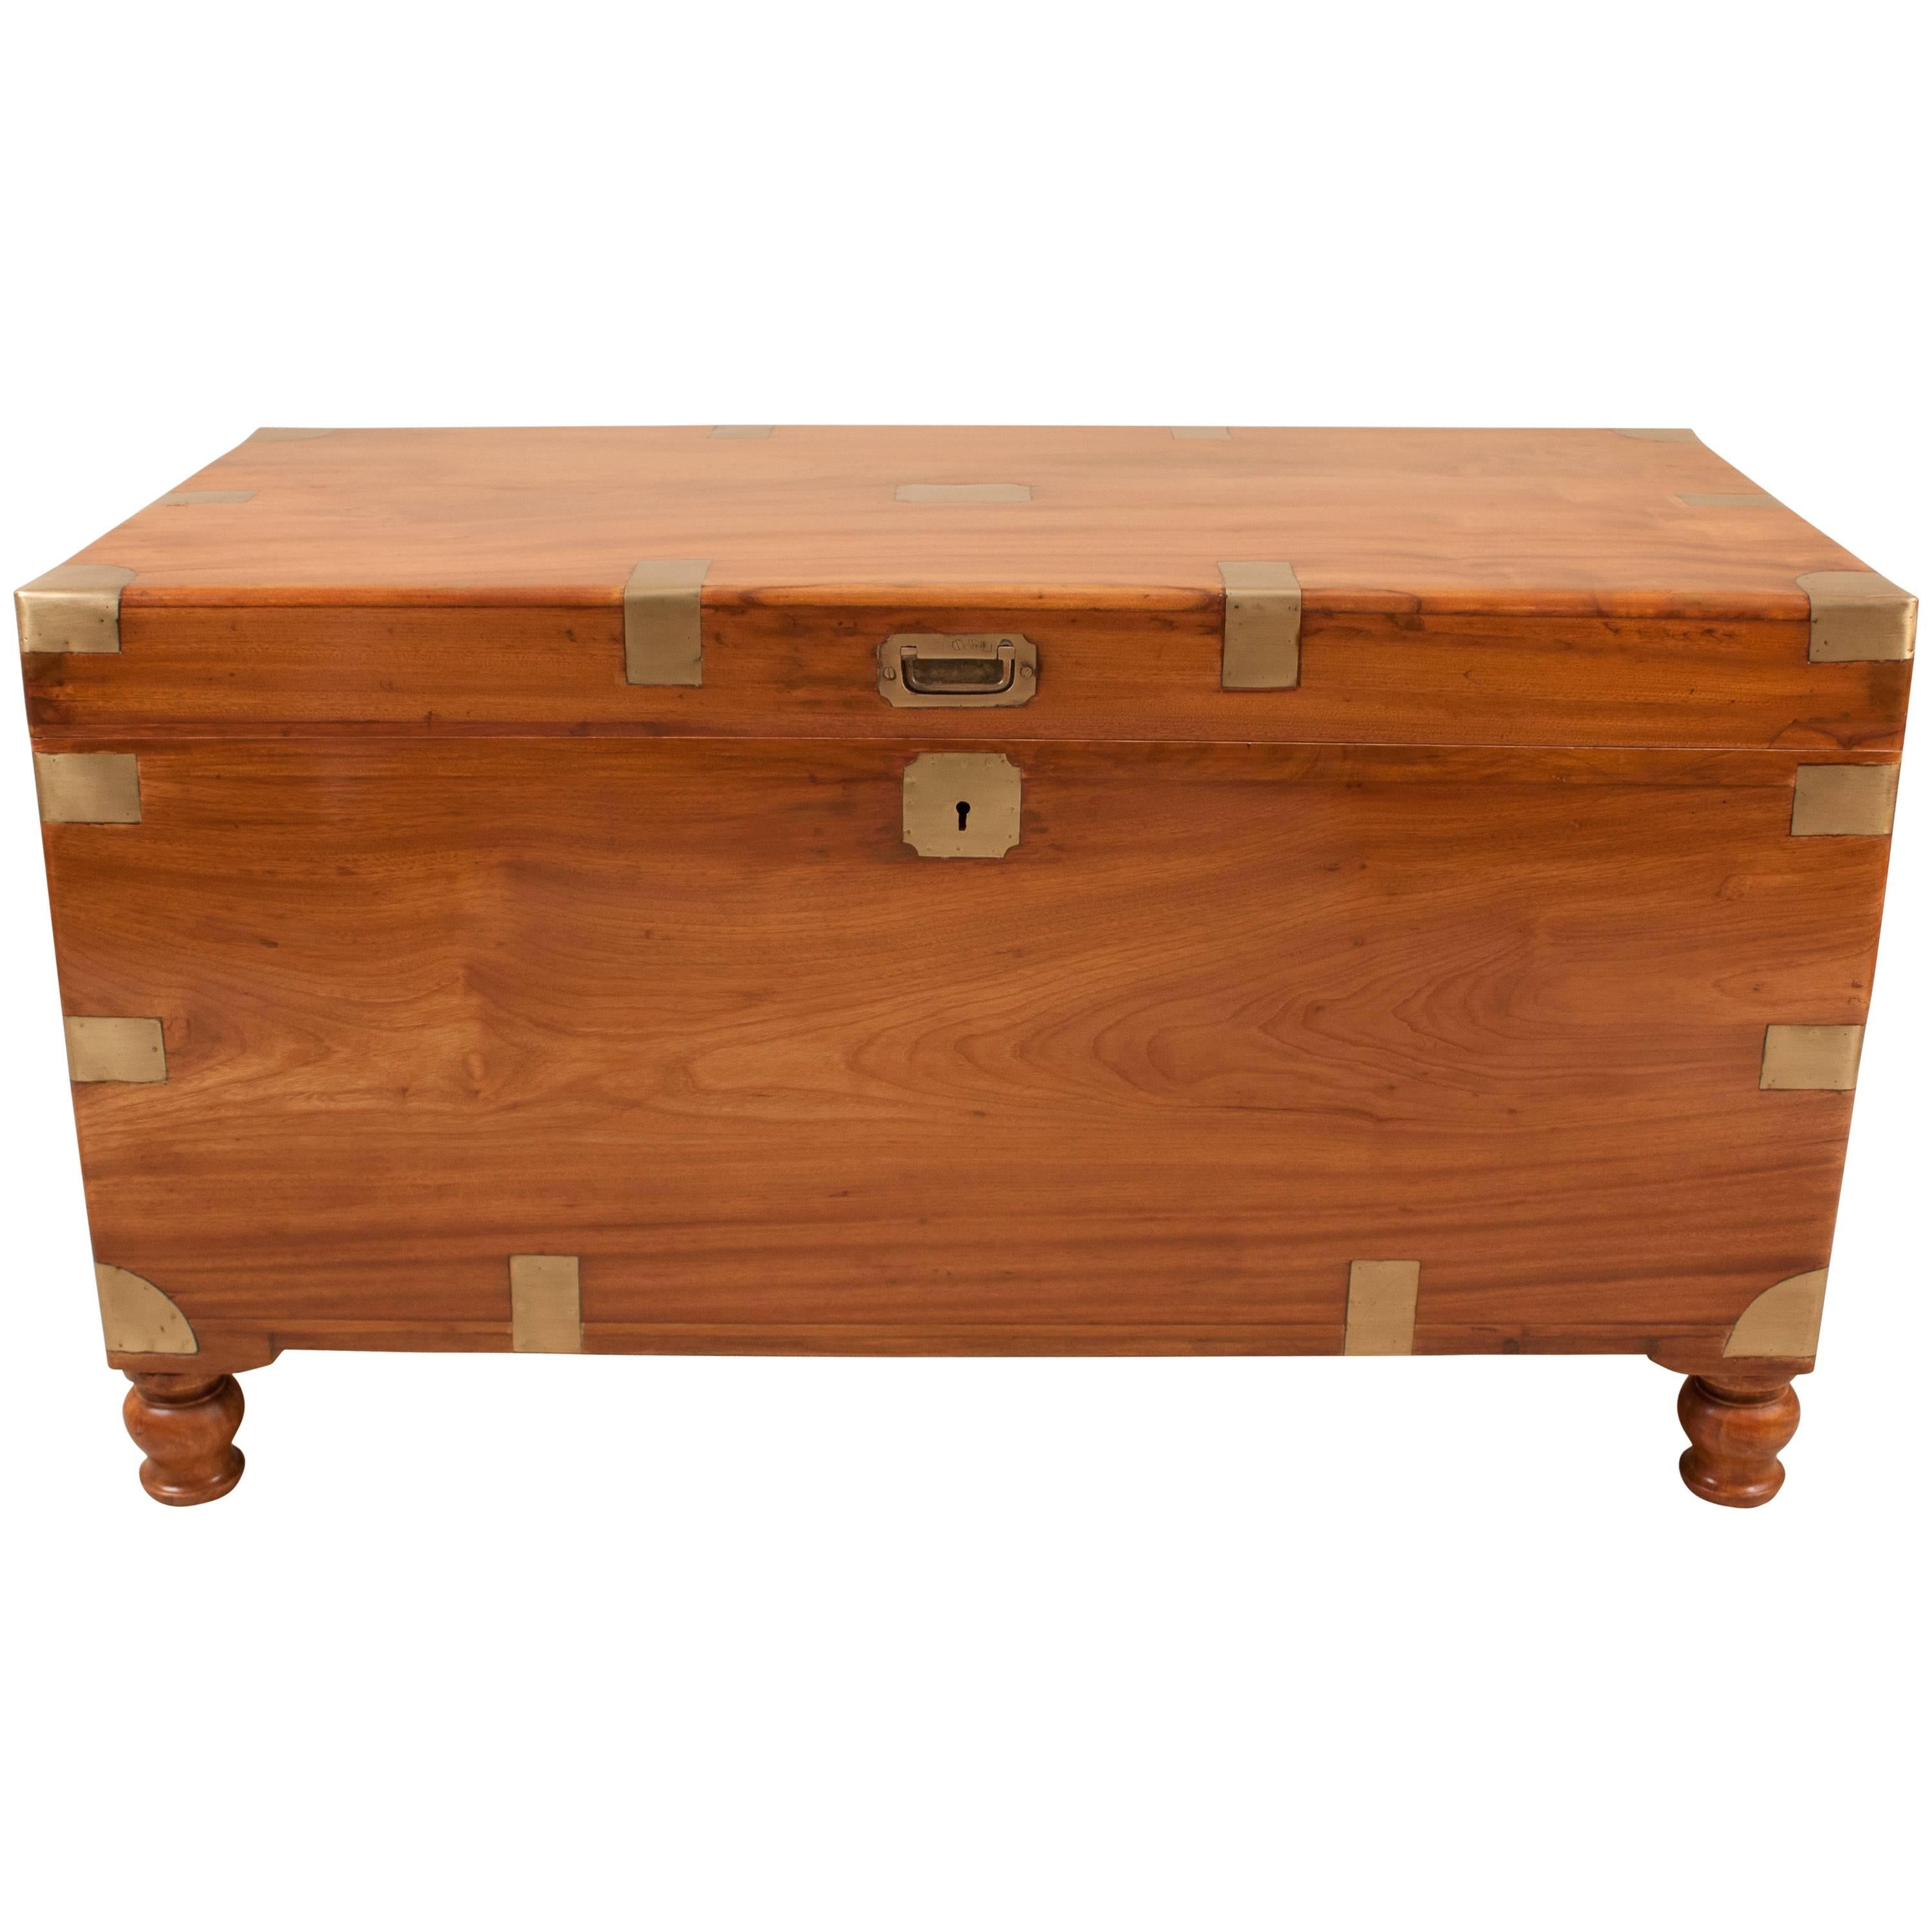 Large 19th Century English Camphor Wood Captain's Chest or Trunk